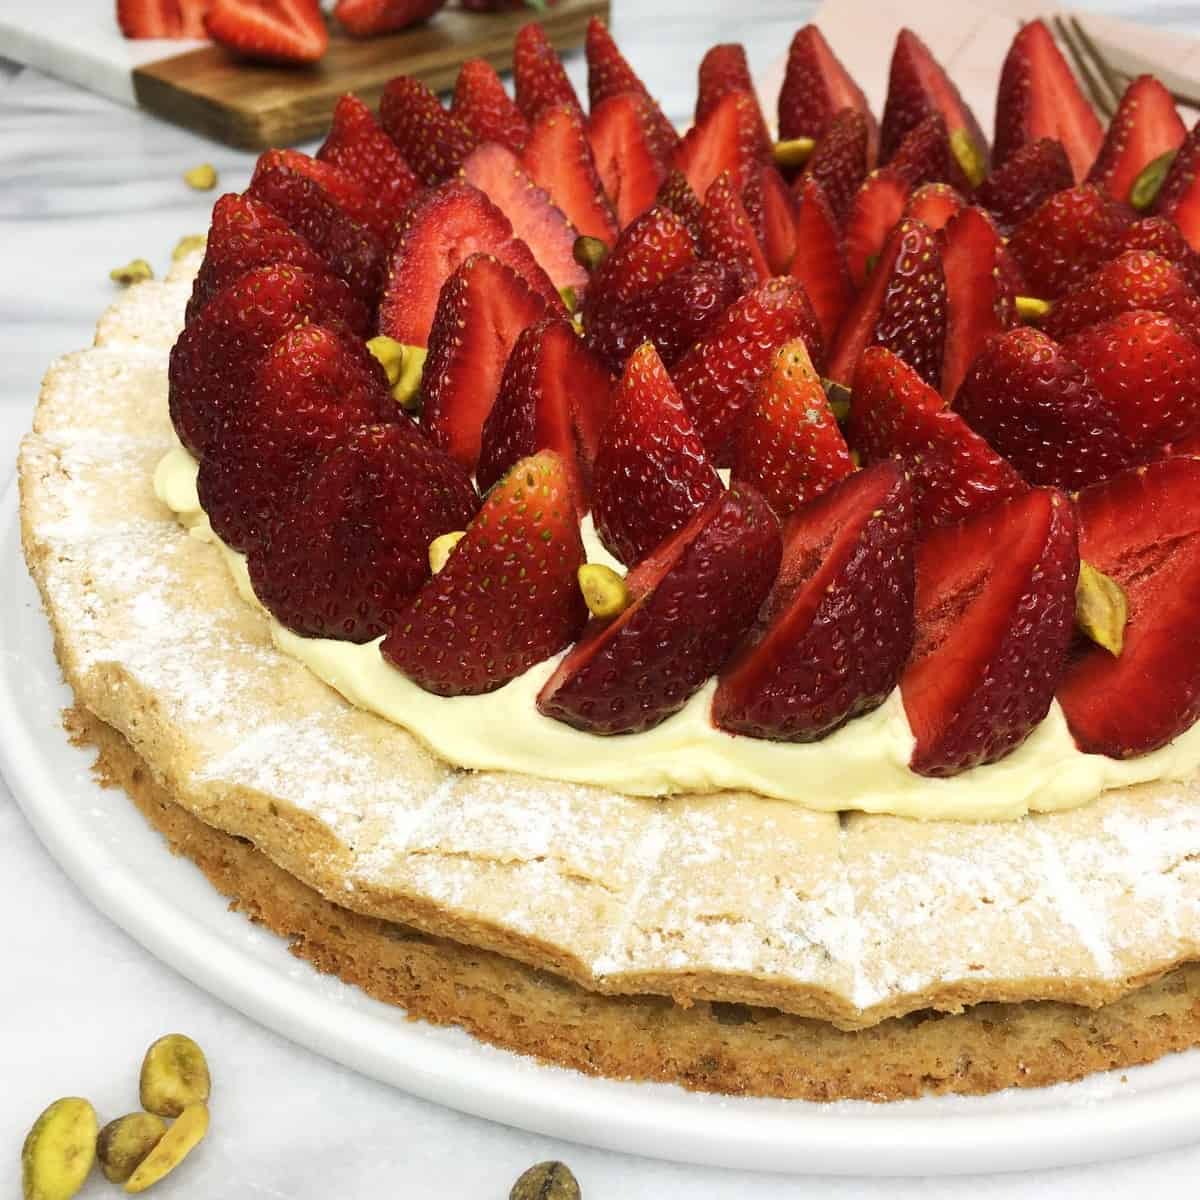 Pistachio dacquoise decorated with fresh strawberries on a white serving platter with berries and flatware on background